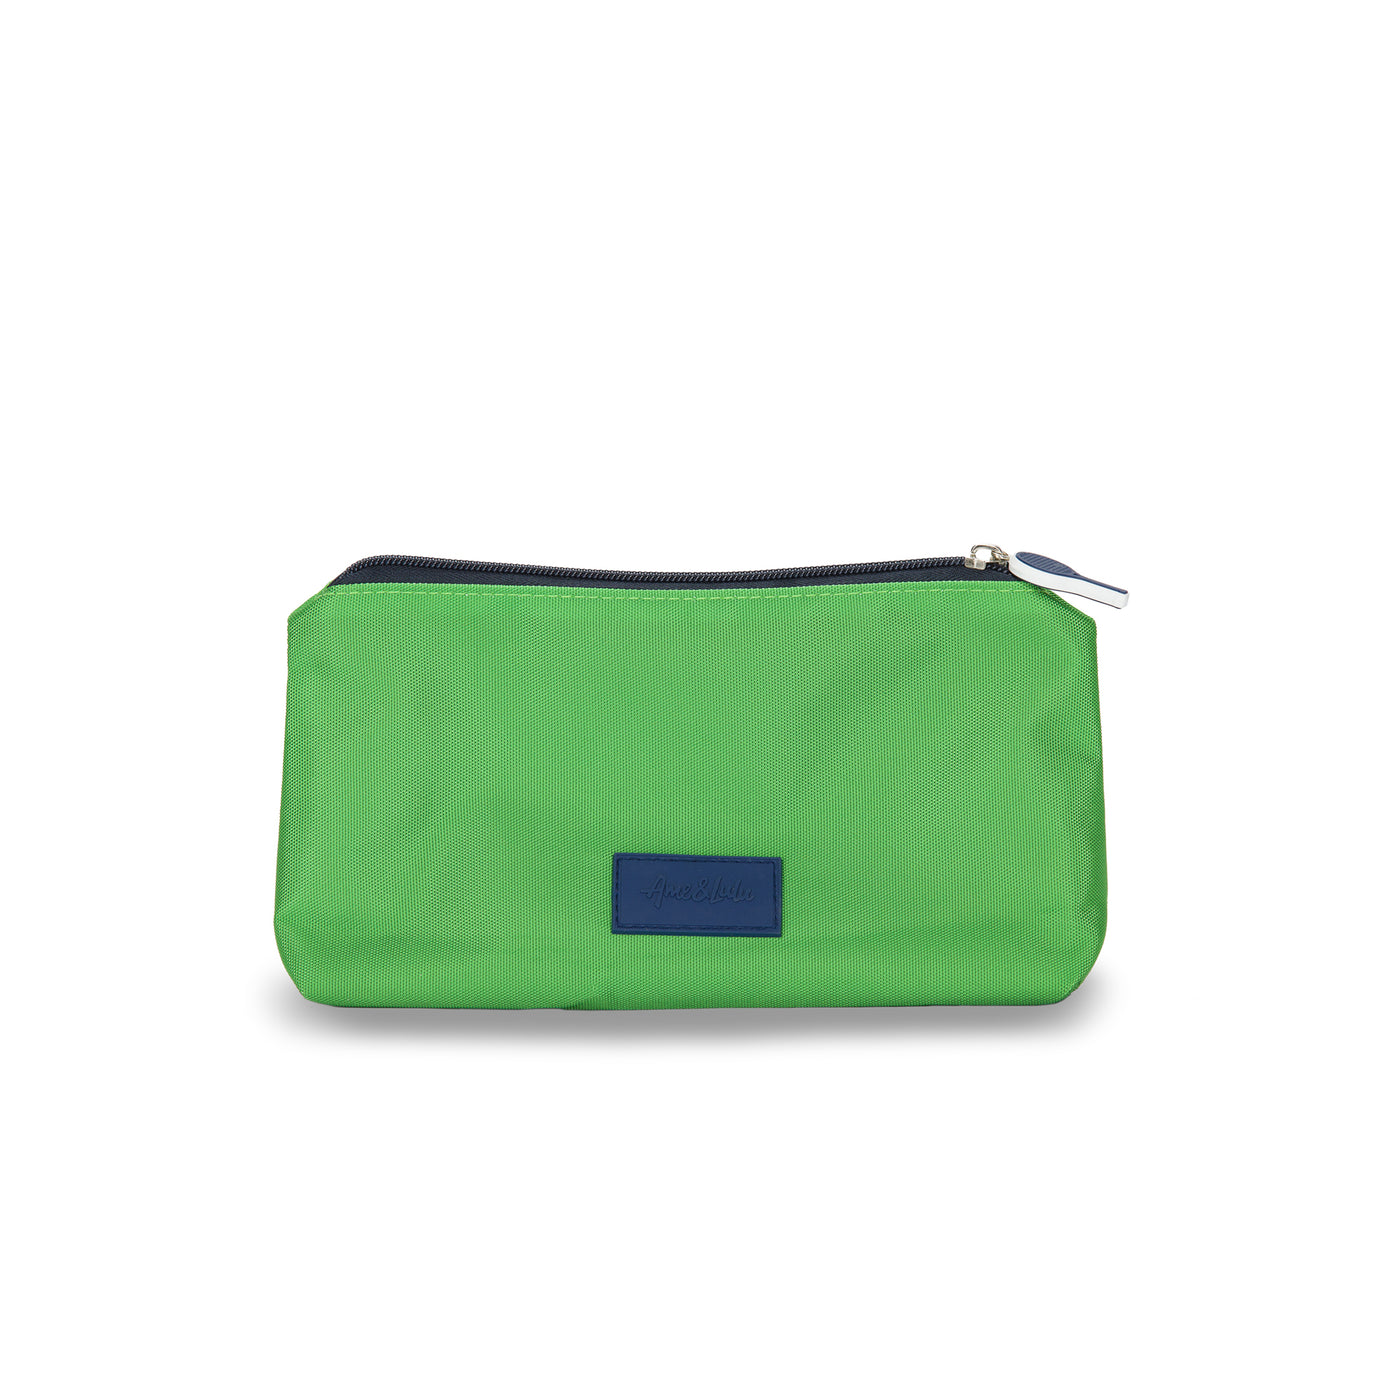 Back view of grass green pouch